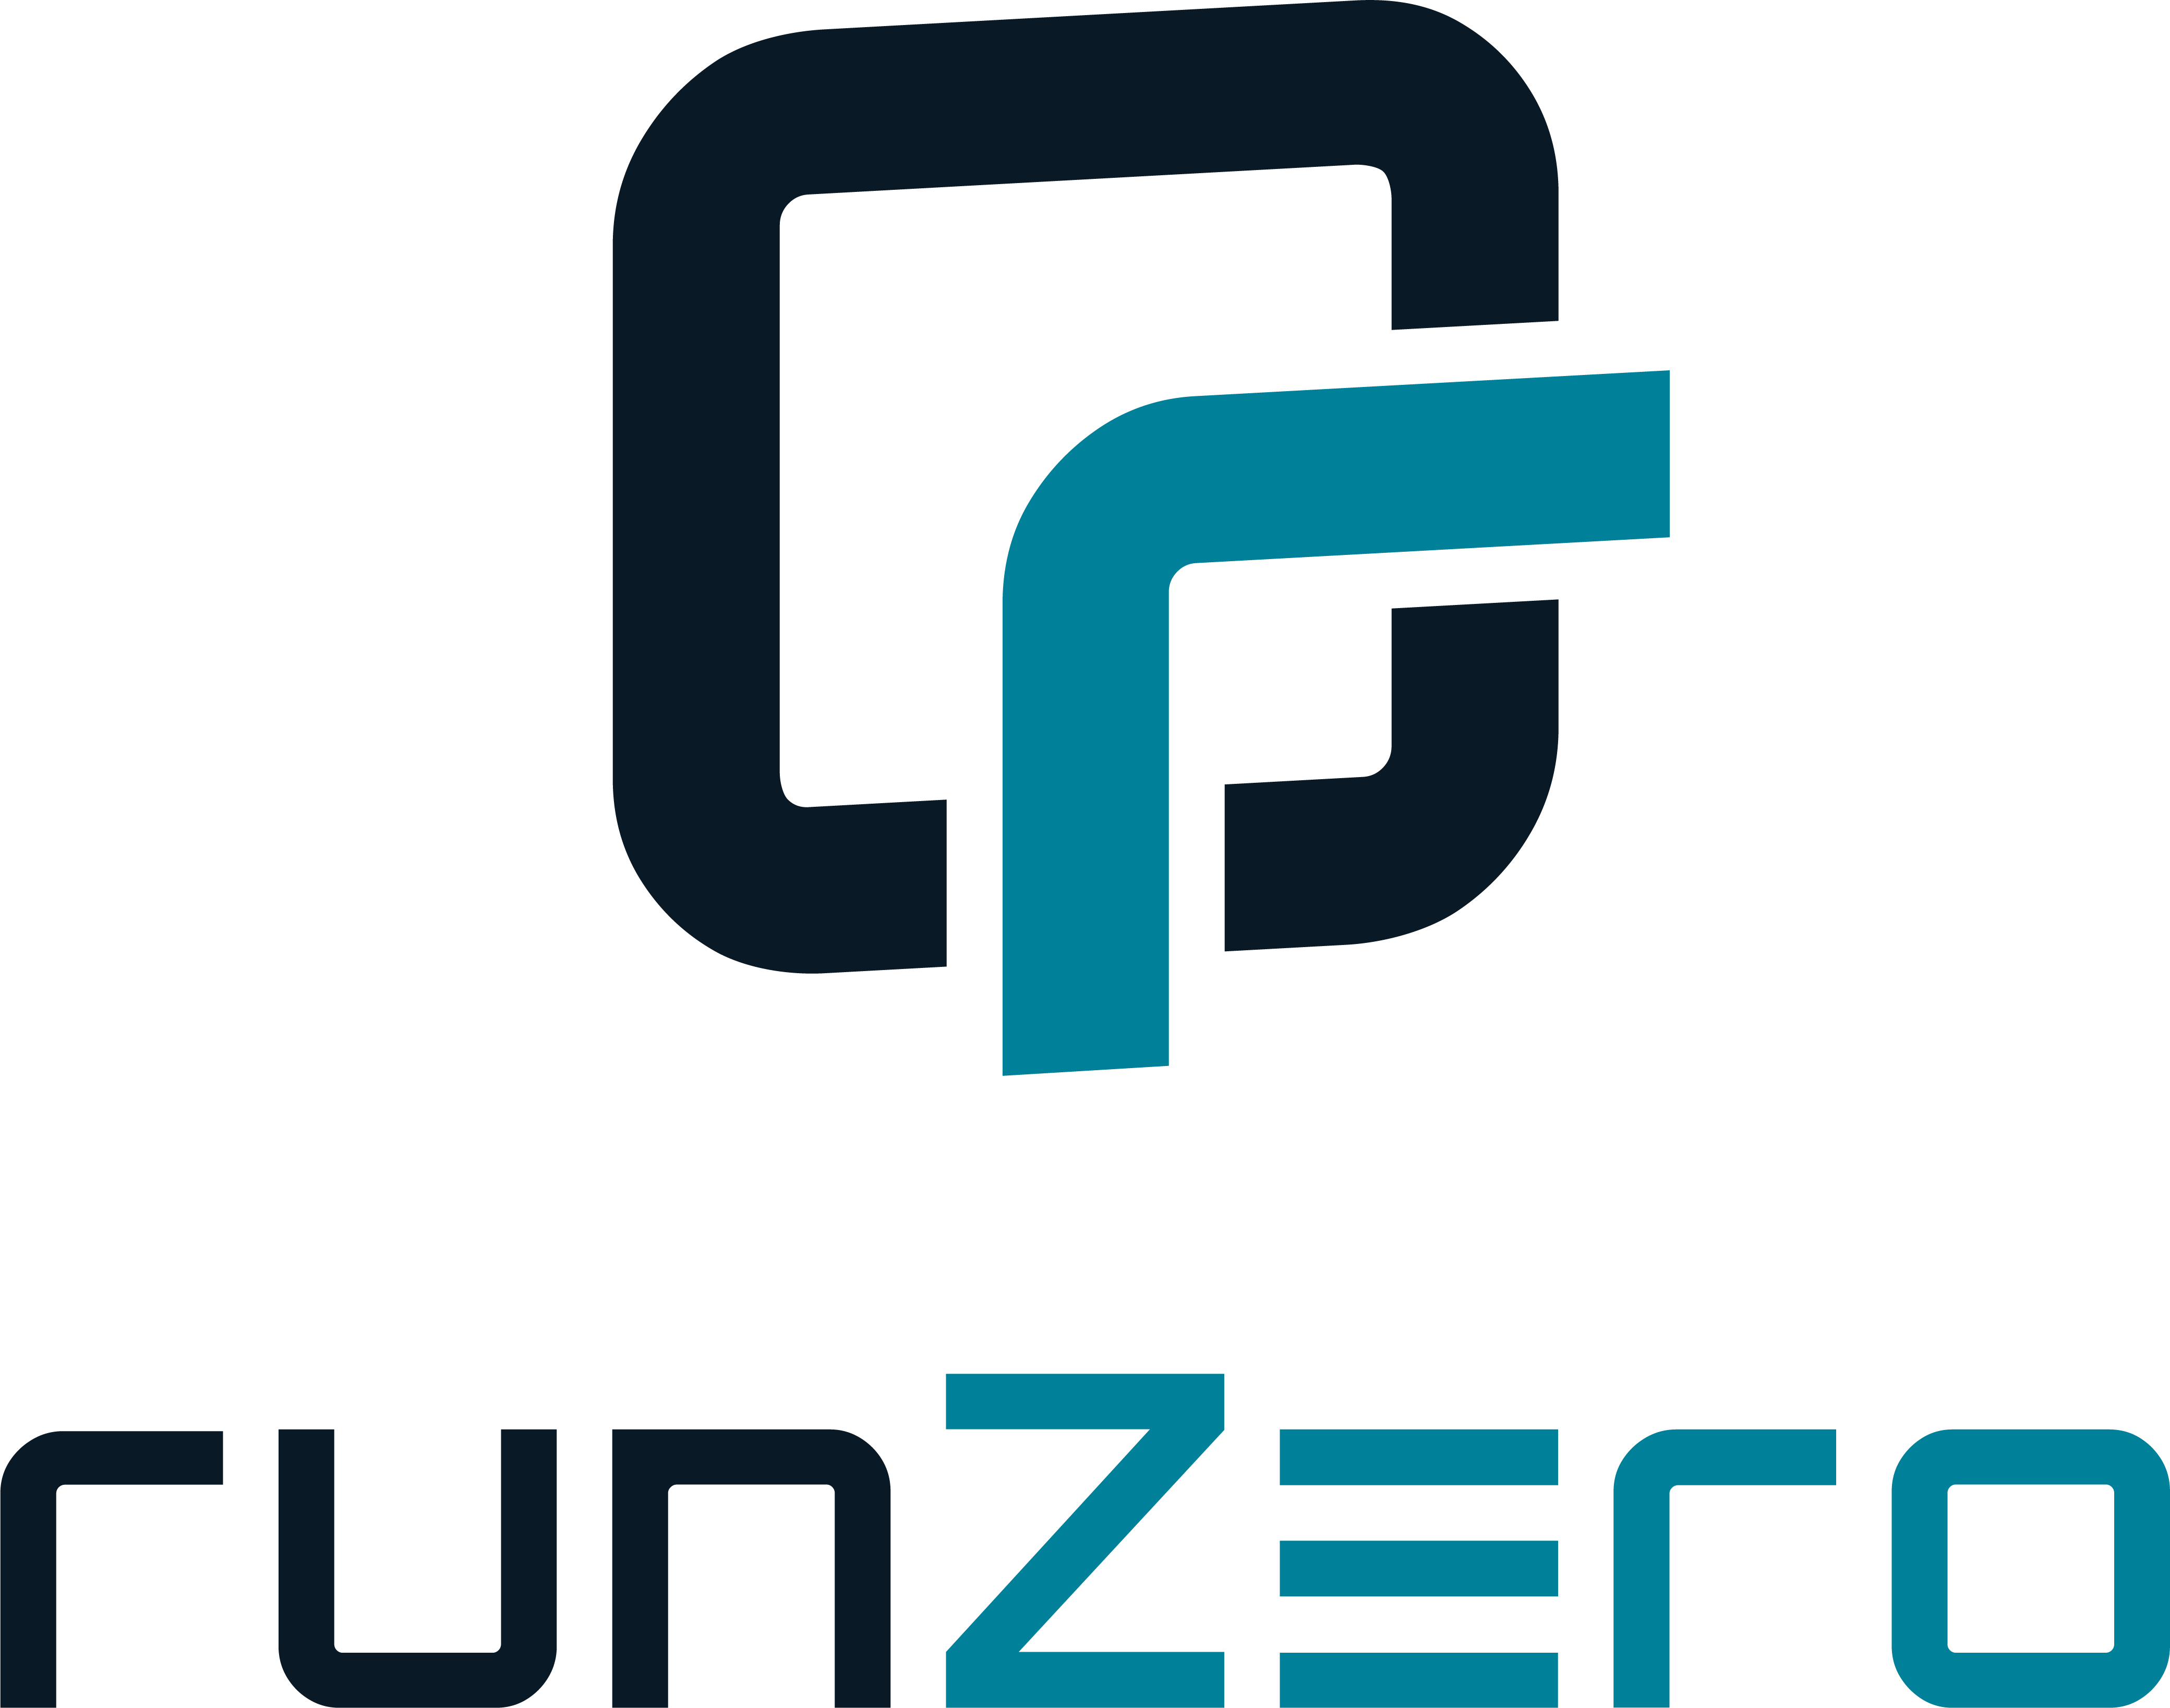 Learn more about runZero